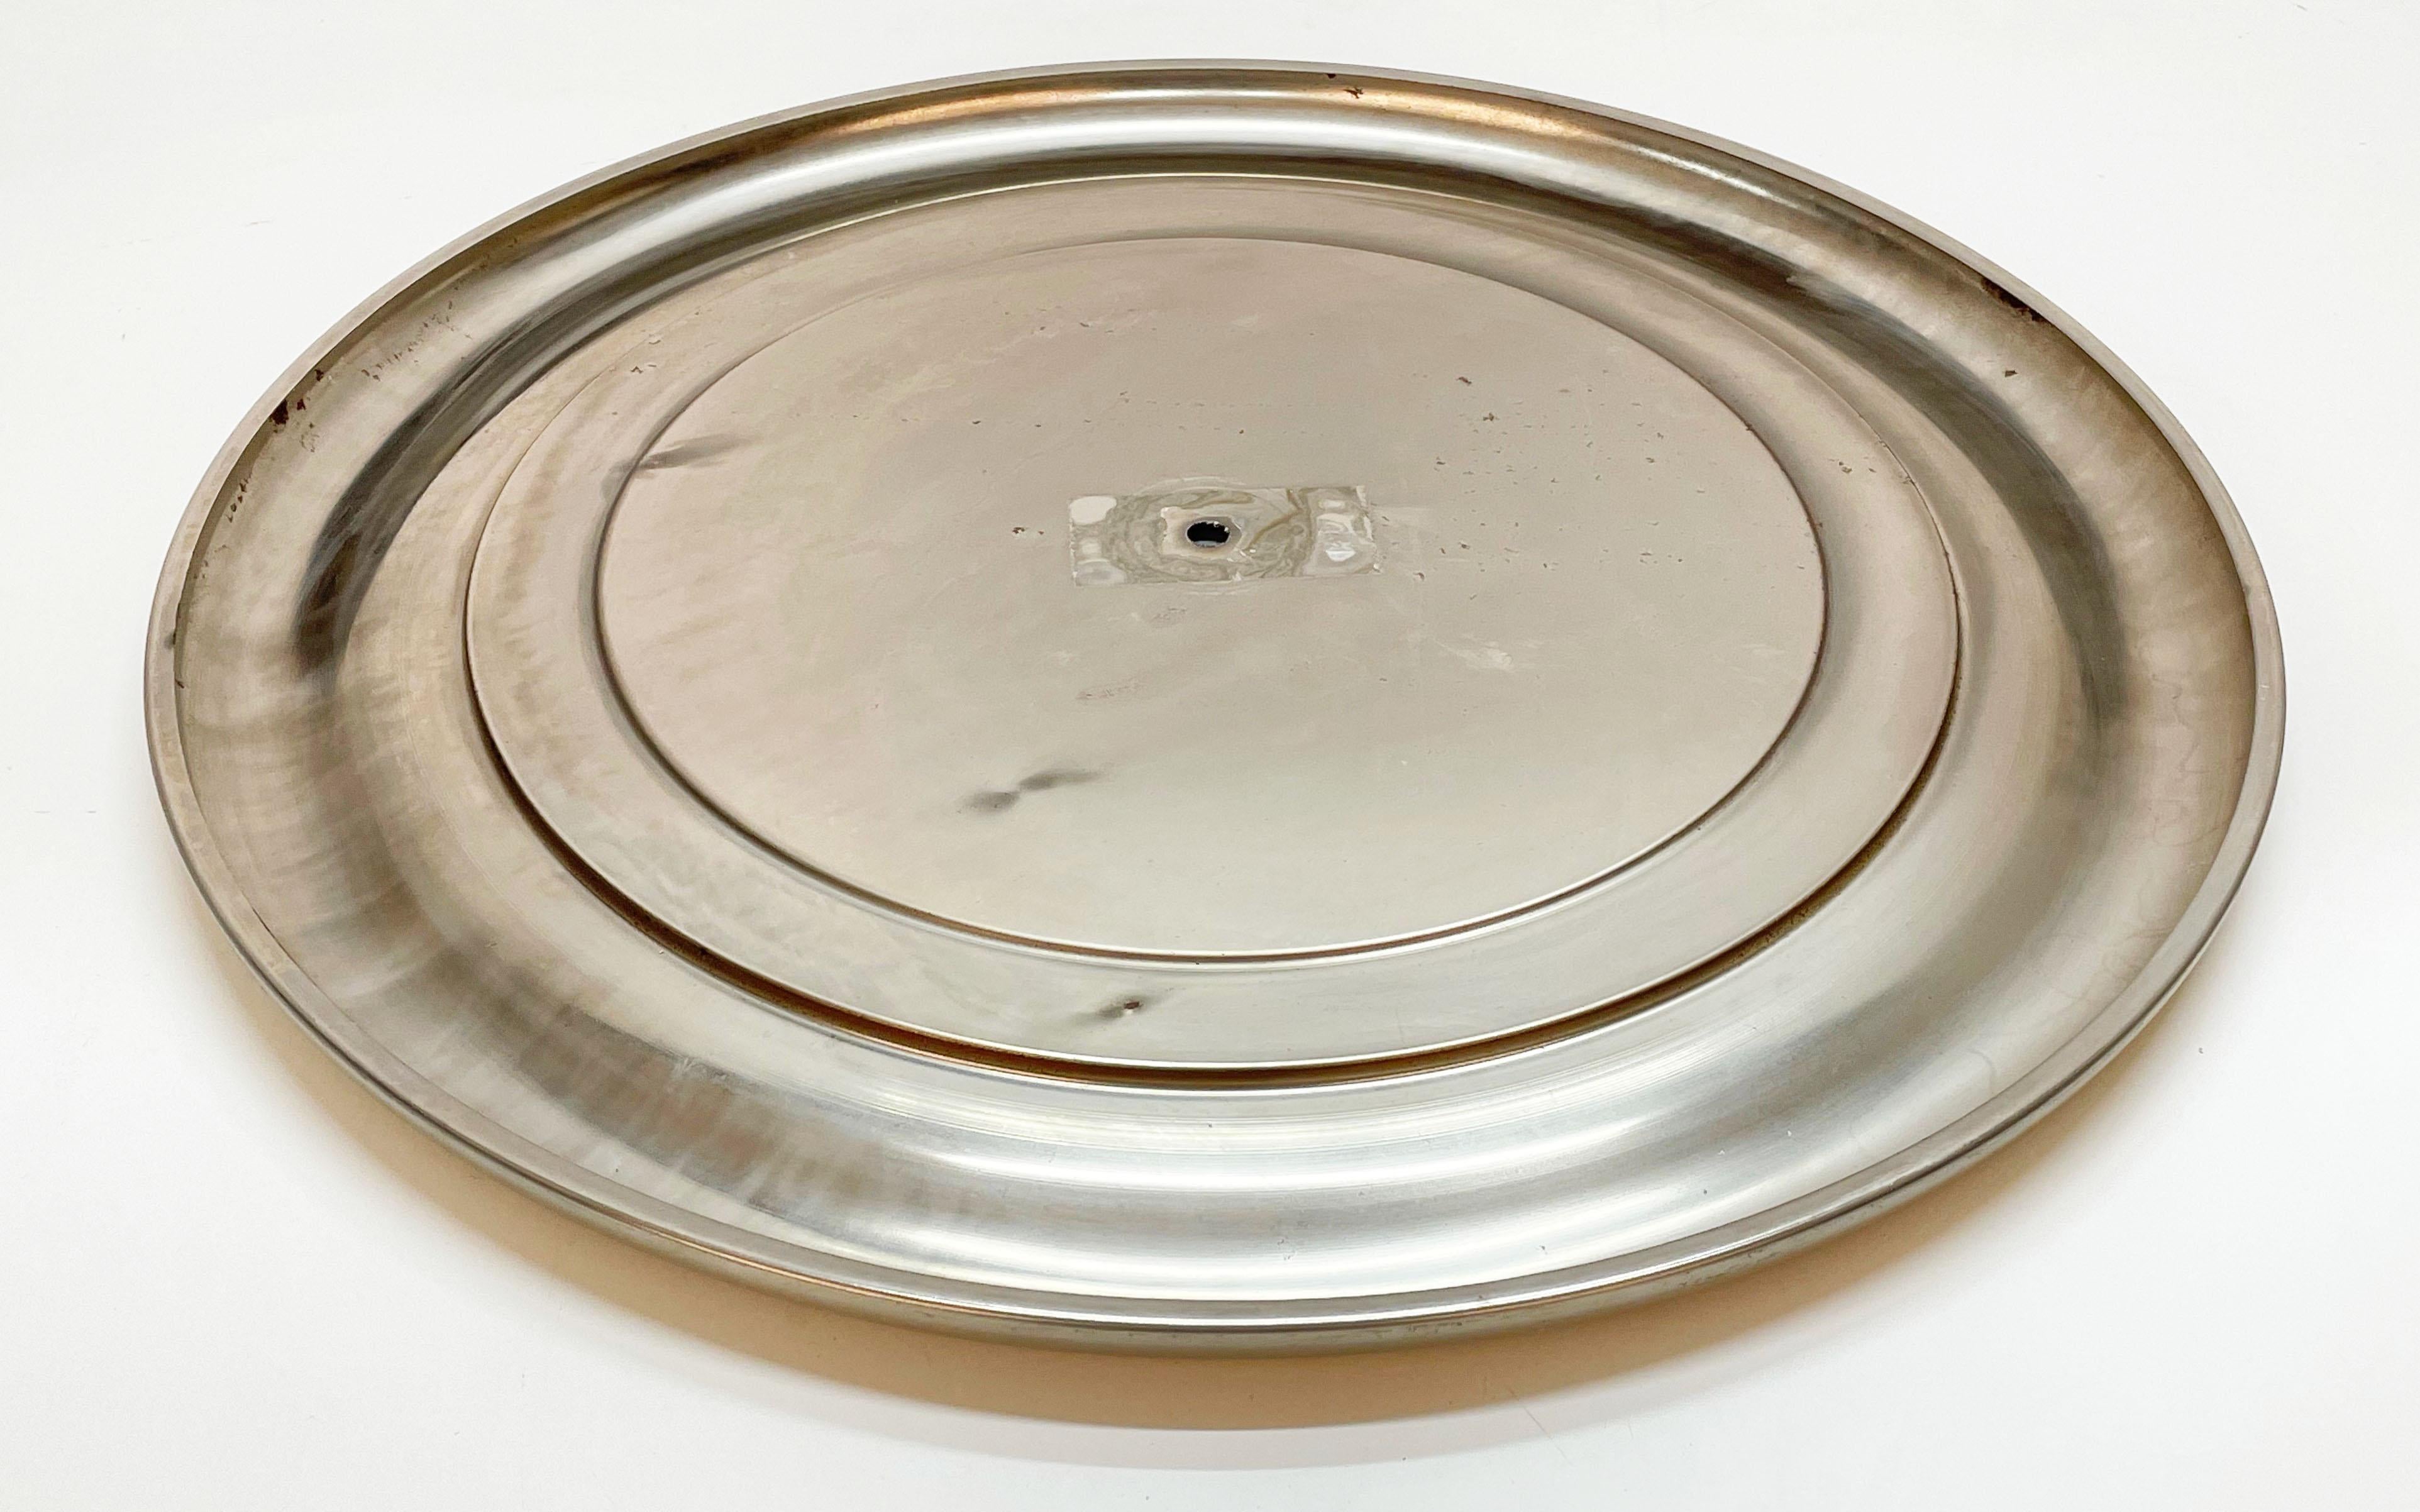 Midcentury Reggiani Italian Round Steel and Bevelled Wall Mirror, 1960s For Sale 7